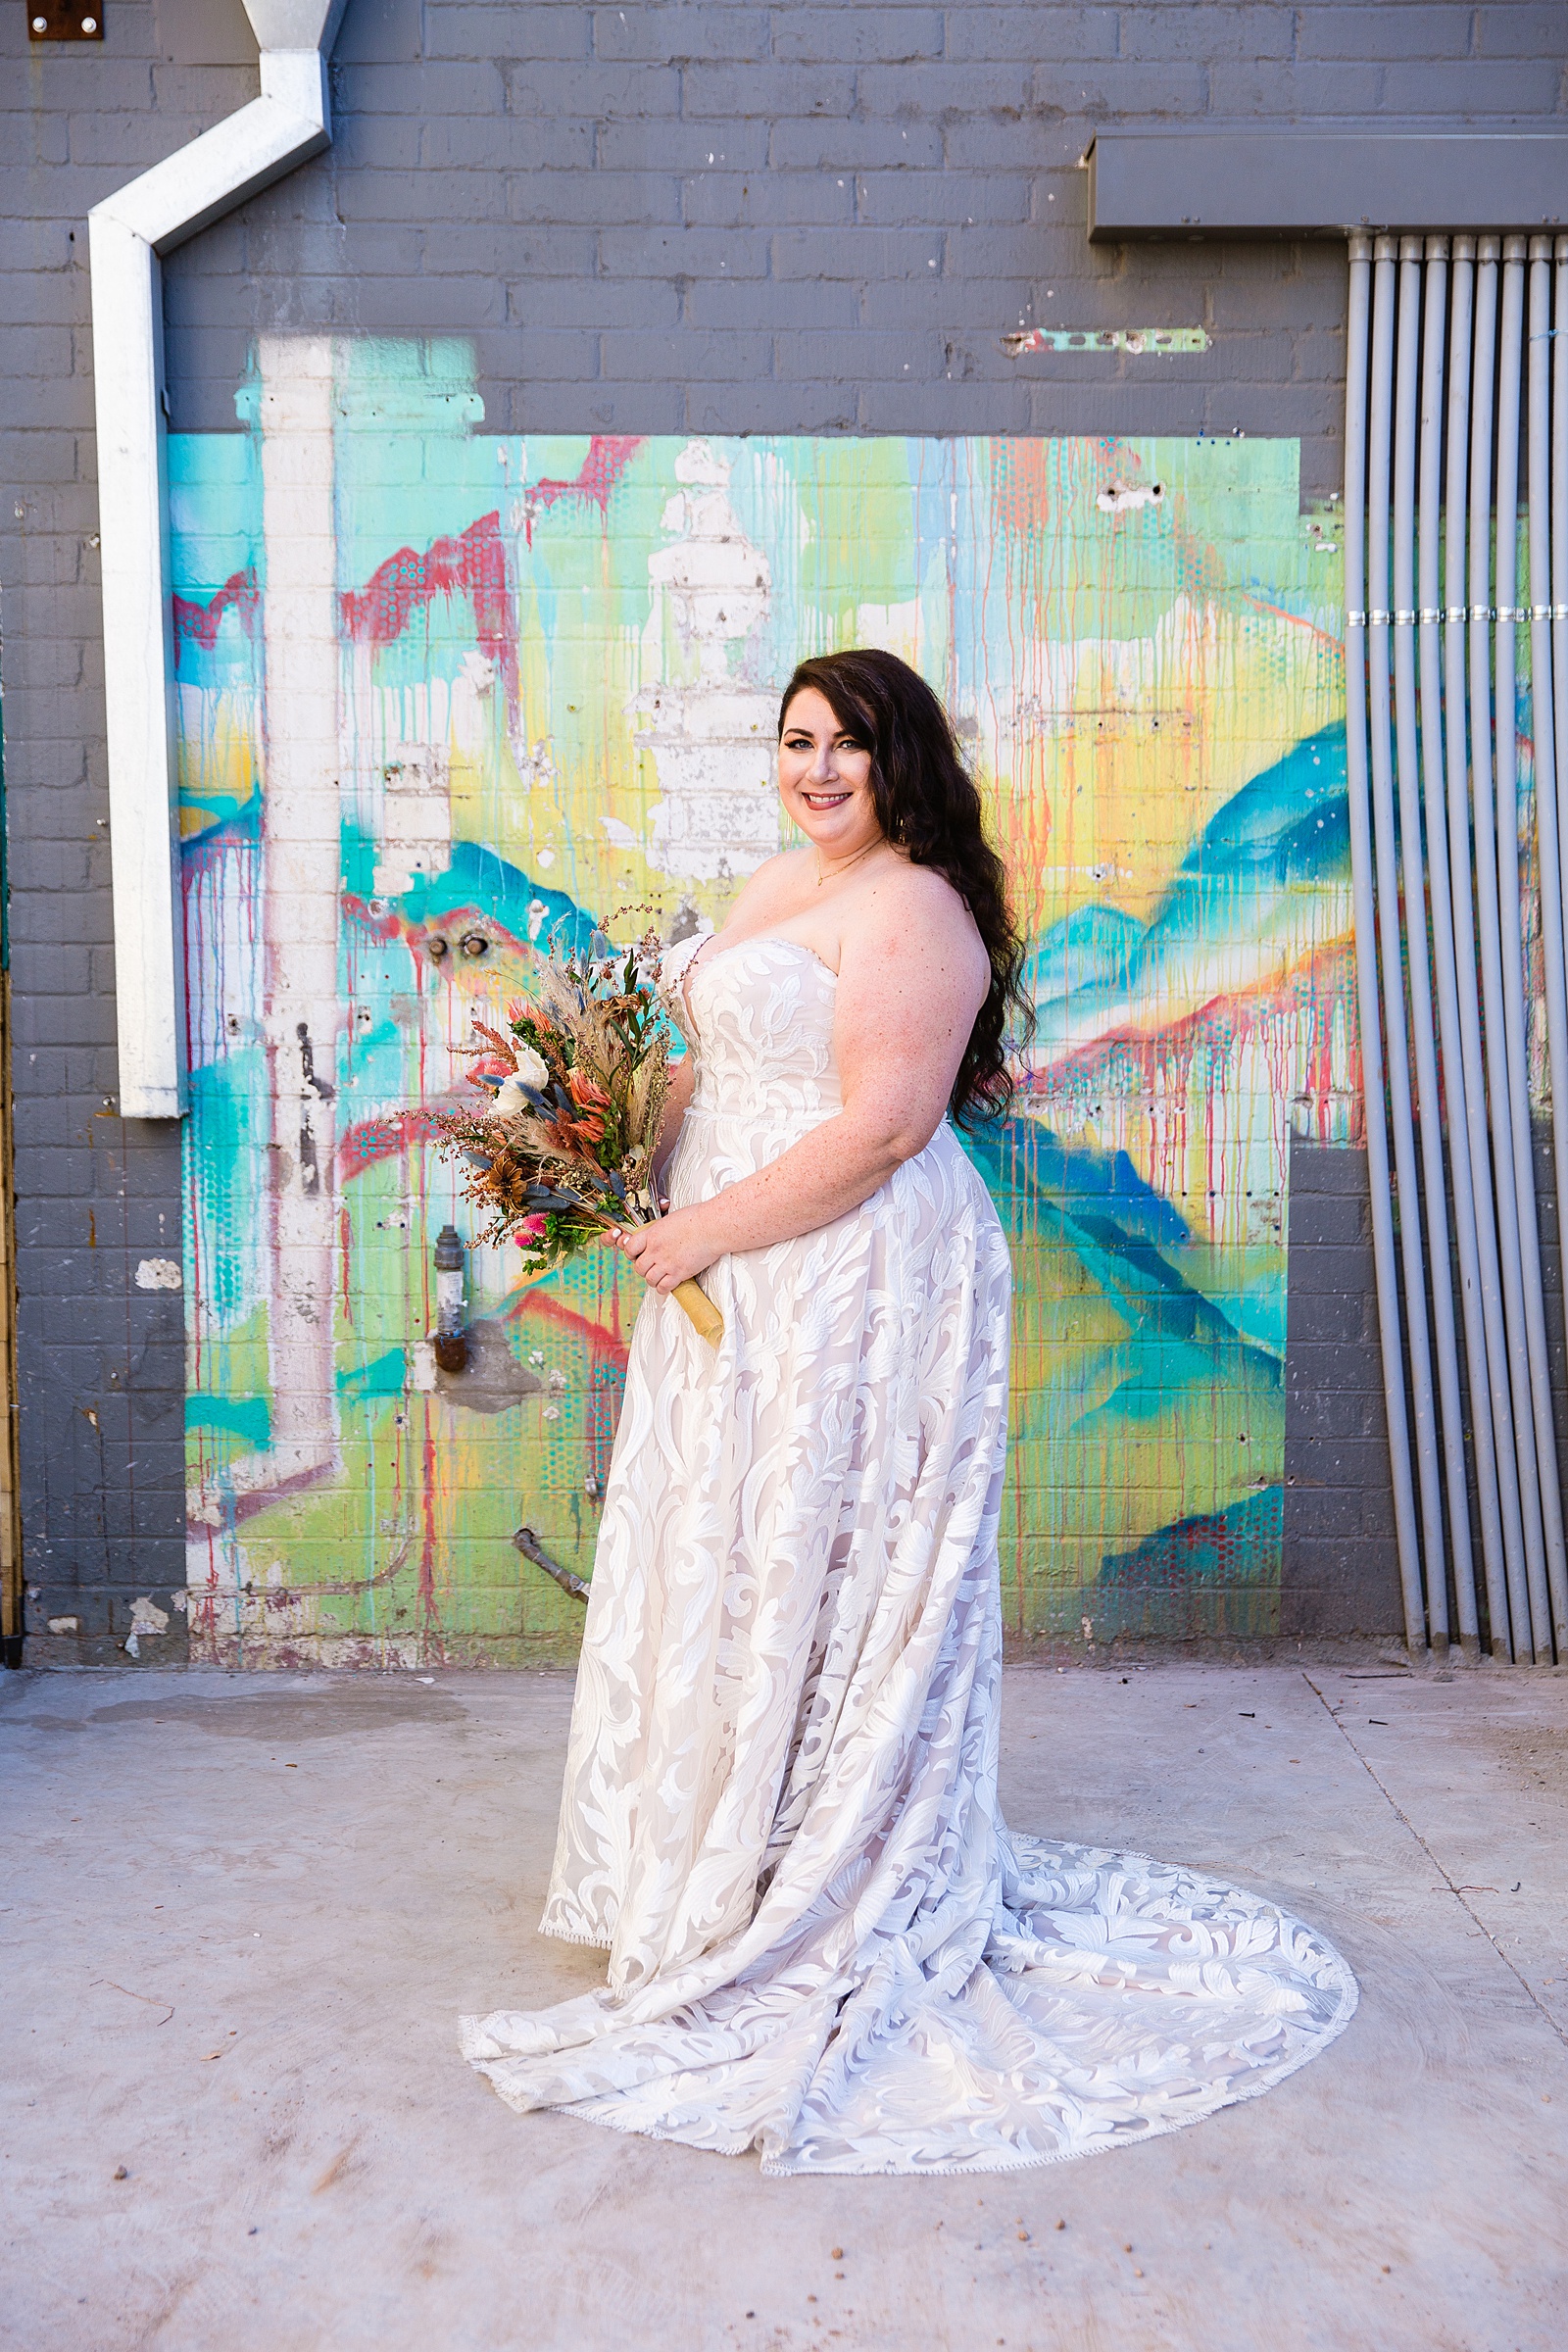 Bride's romantic blush wedding dress against a colorful mural for her MonOrchid wedding by PMA Photography.